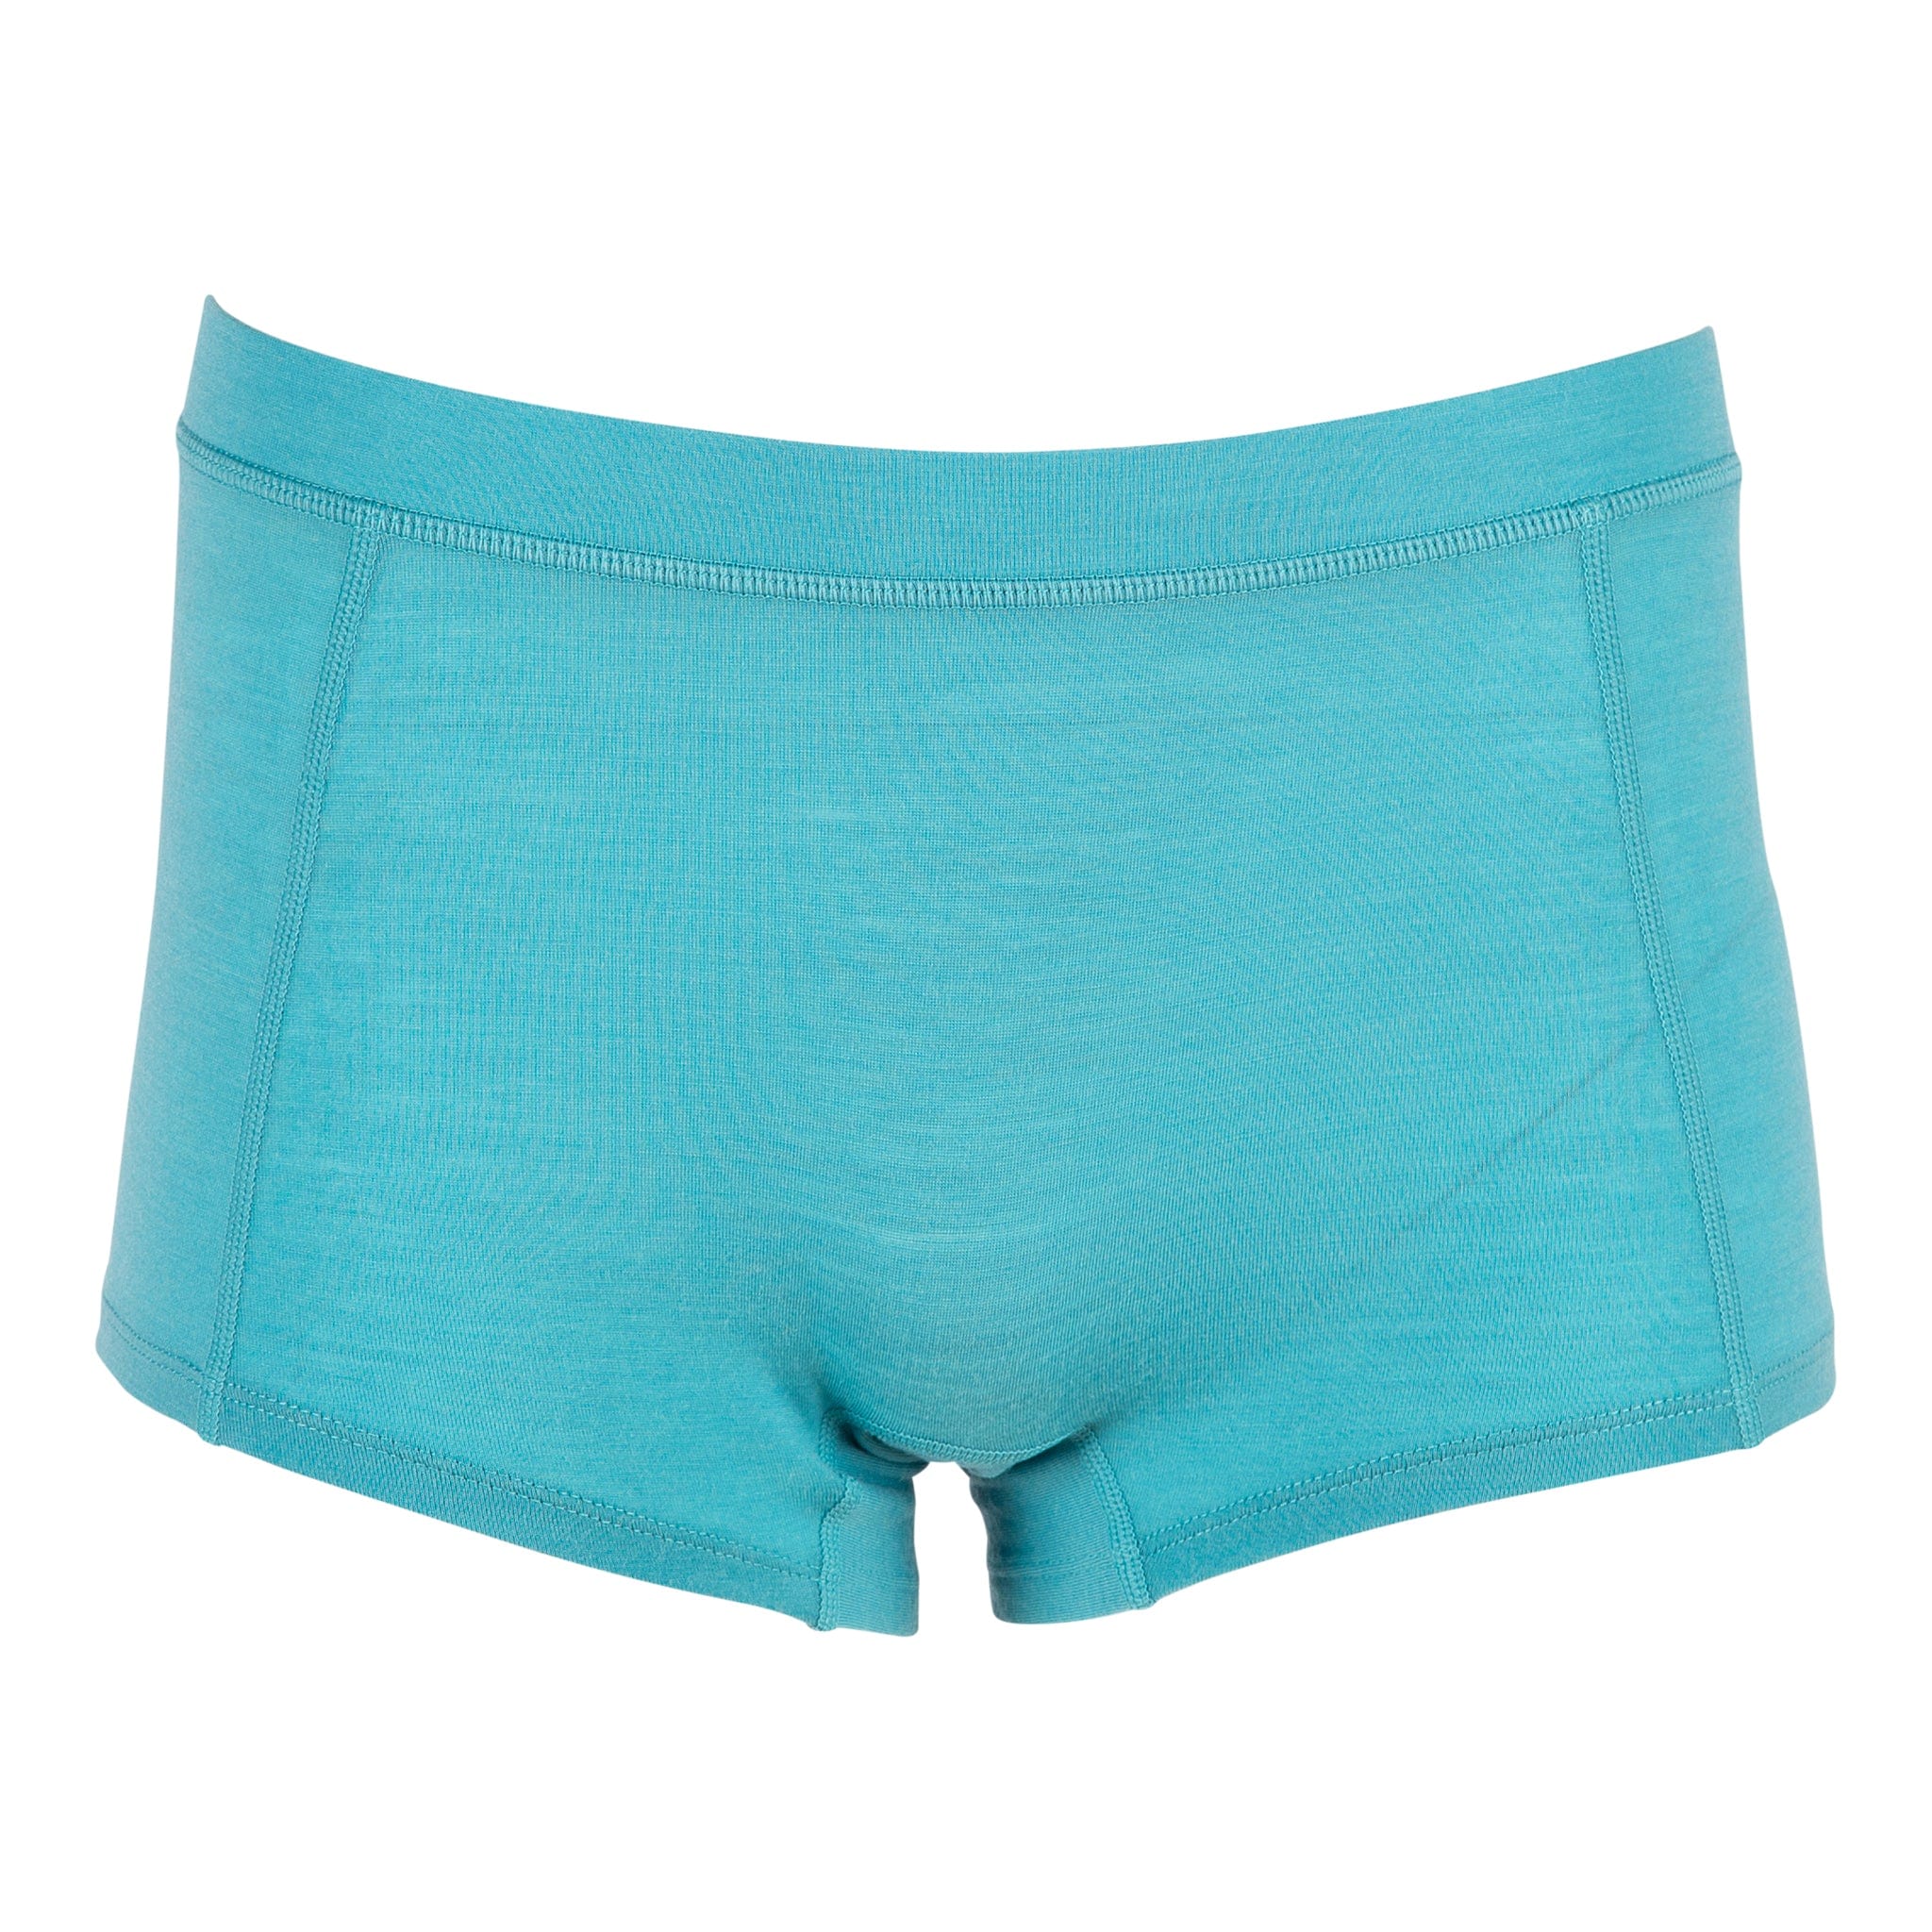 These Are The Most Comfortable Boxers For Women To Sleep In  Boxers for  women, Pretty bodysuits, Women wearing mens boxers